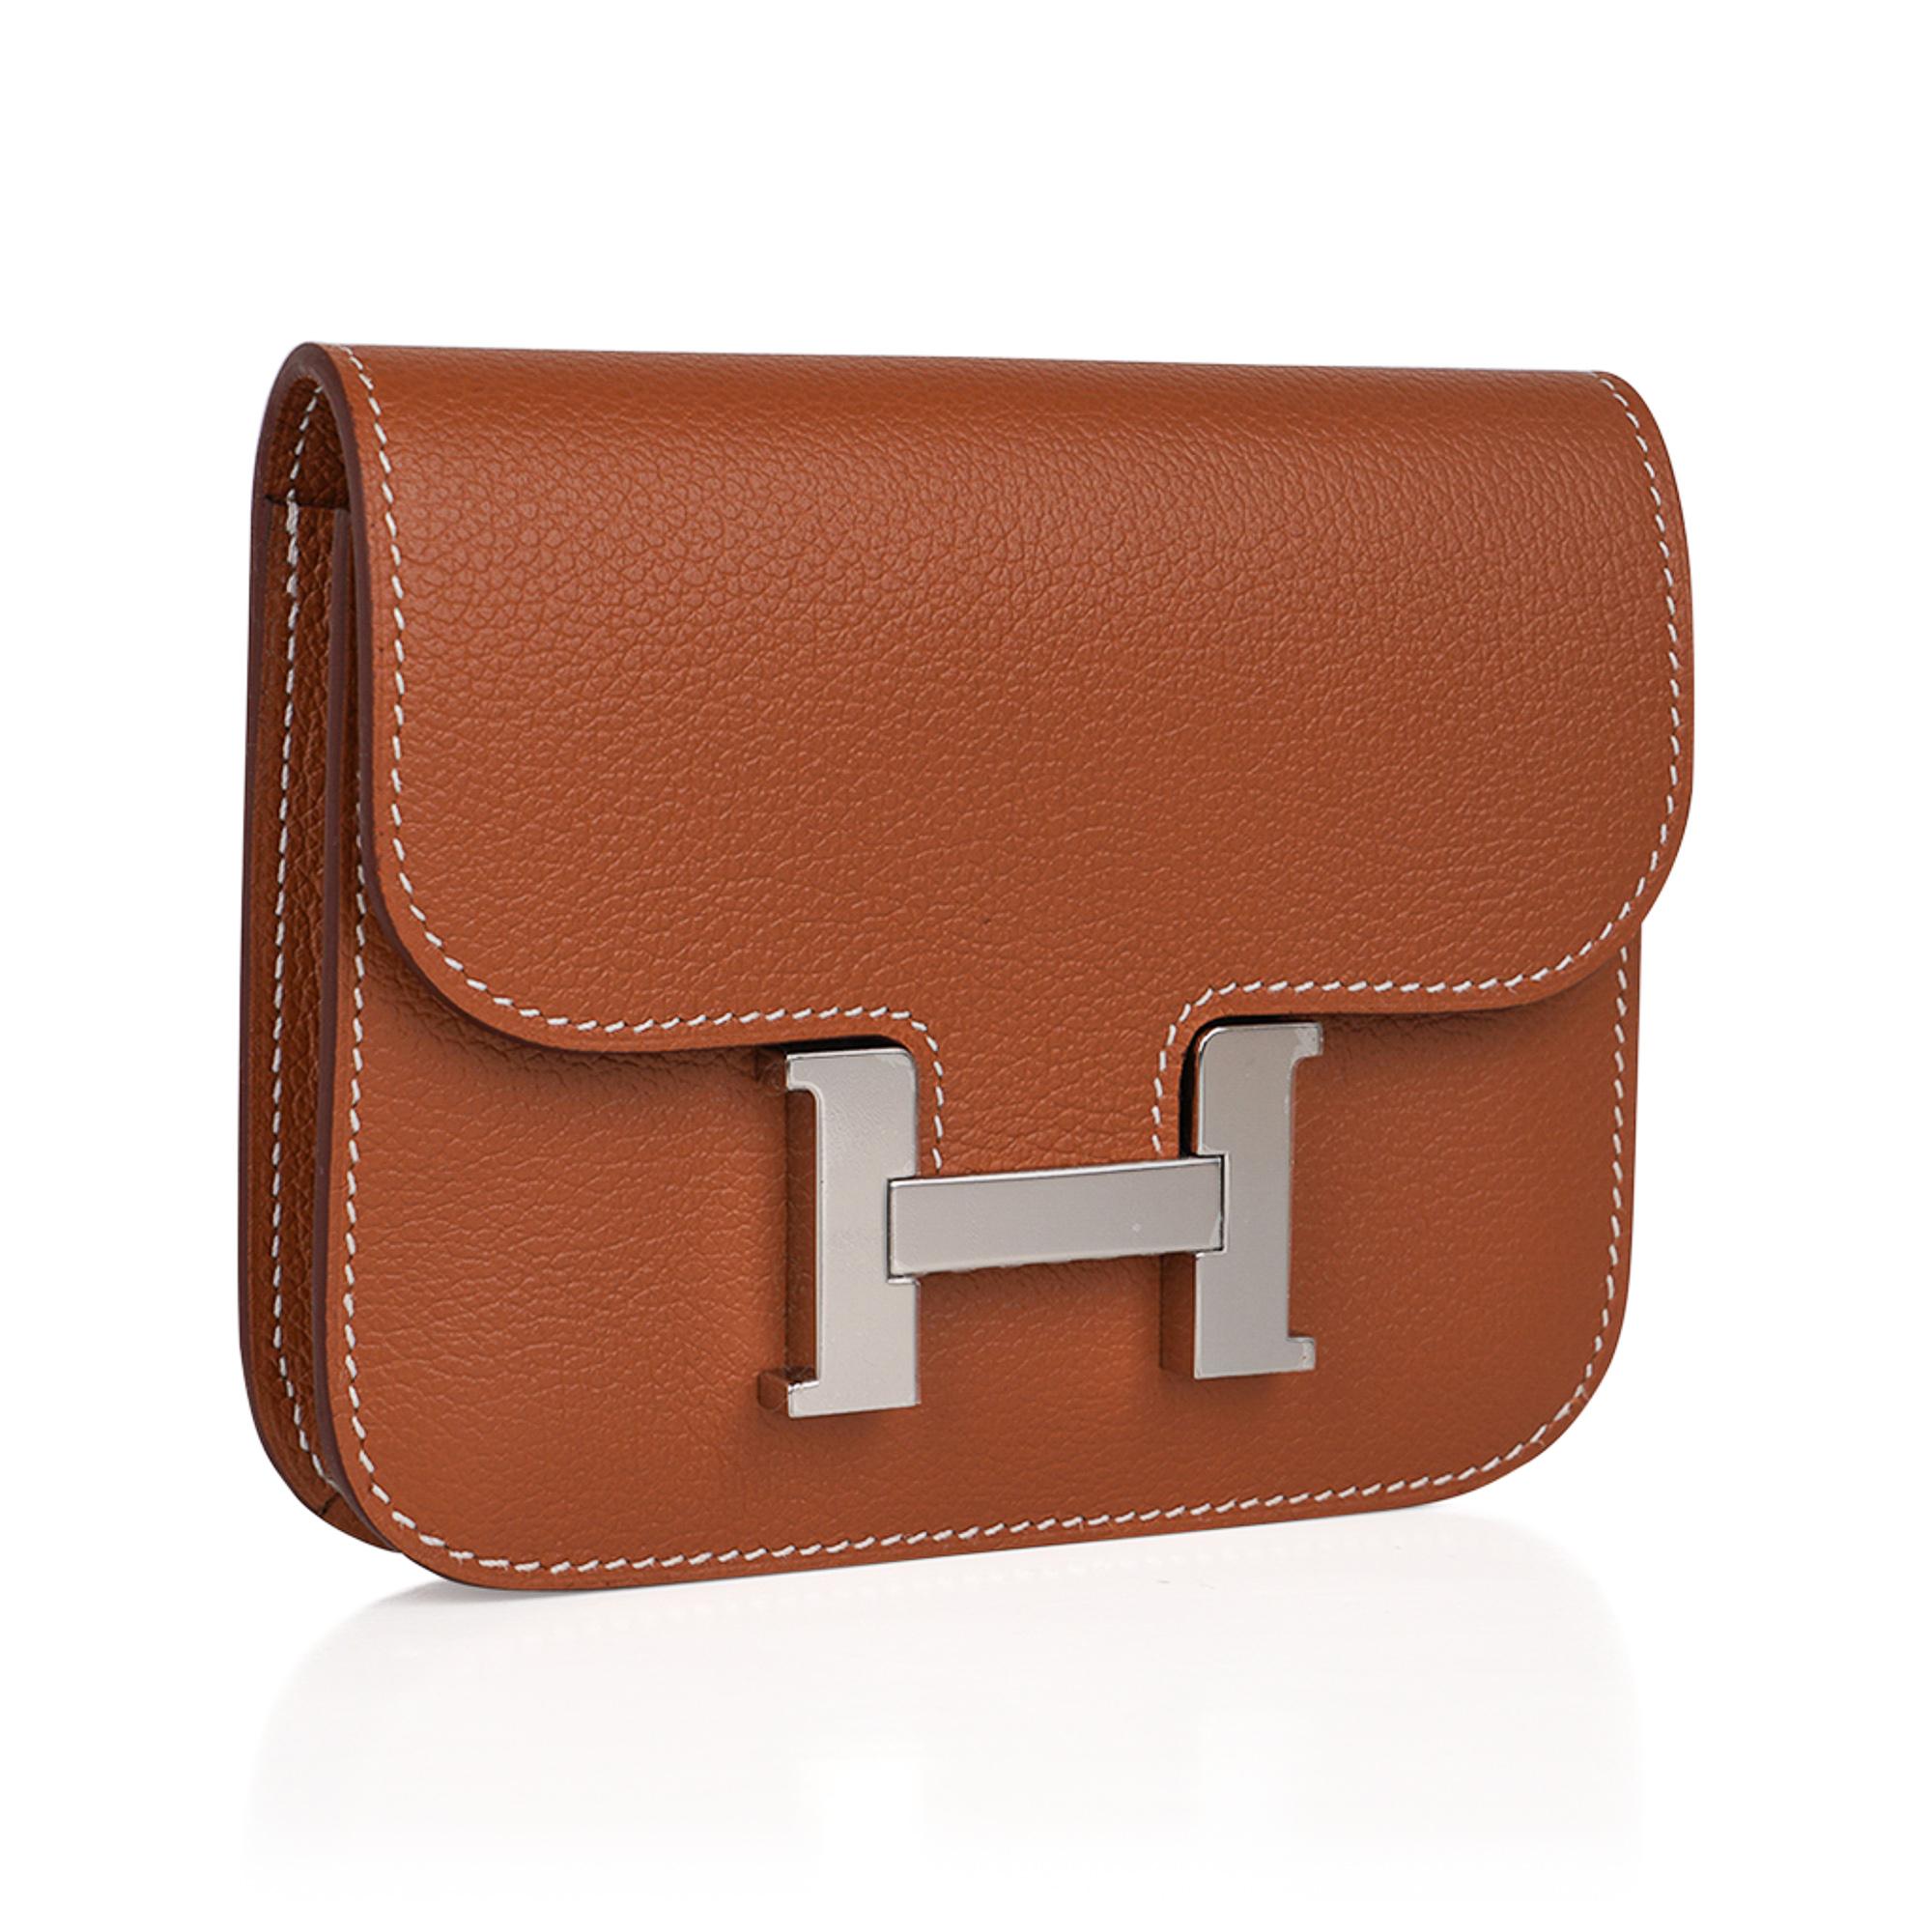 Mightychic offers an Hermes Constance Slim Wallet Belt bag featured in classic Gold.
Crisp Palladium hardware.
Evercolor leather has a rich flat grain.
Includes removable zipped change purse and 2 credit card slots.
Rear belt loop allows you to wear